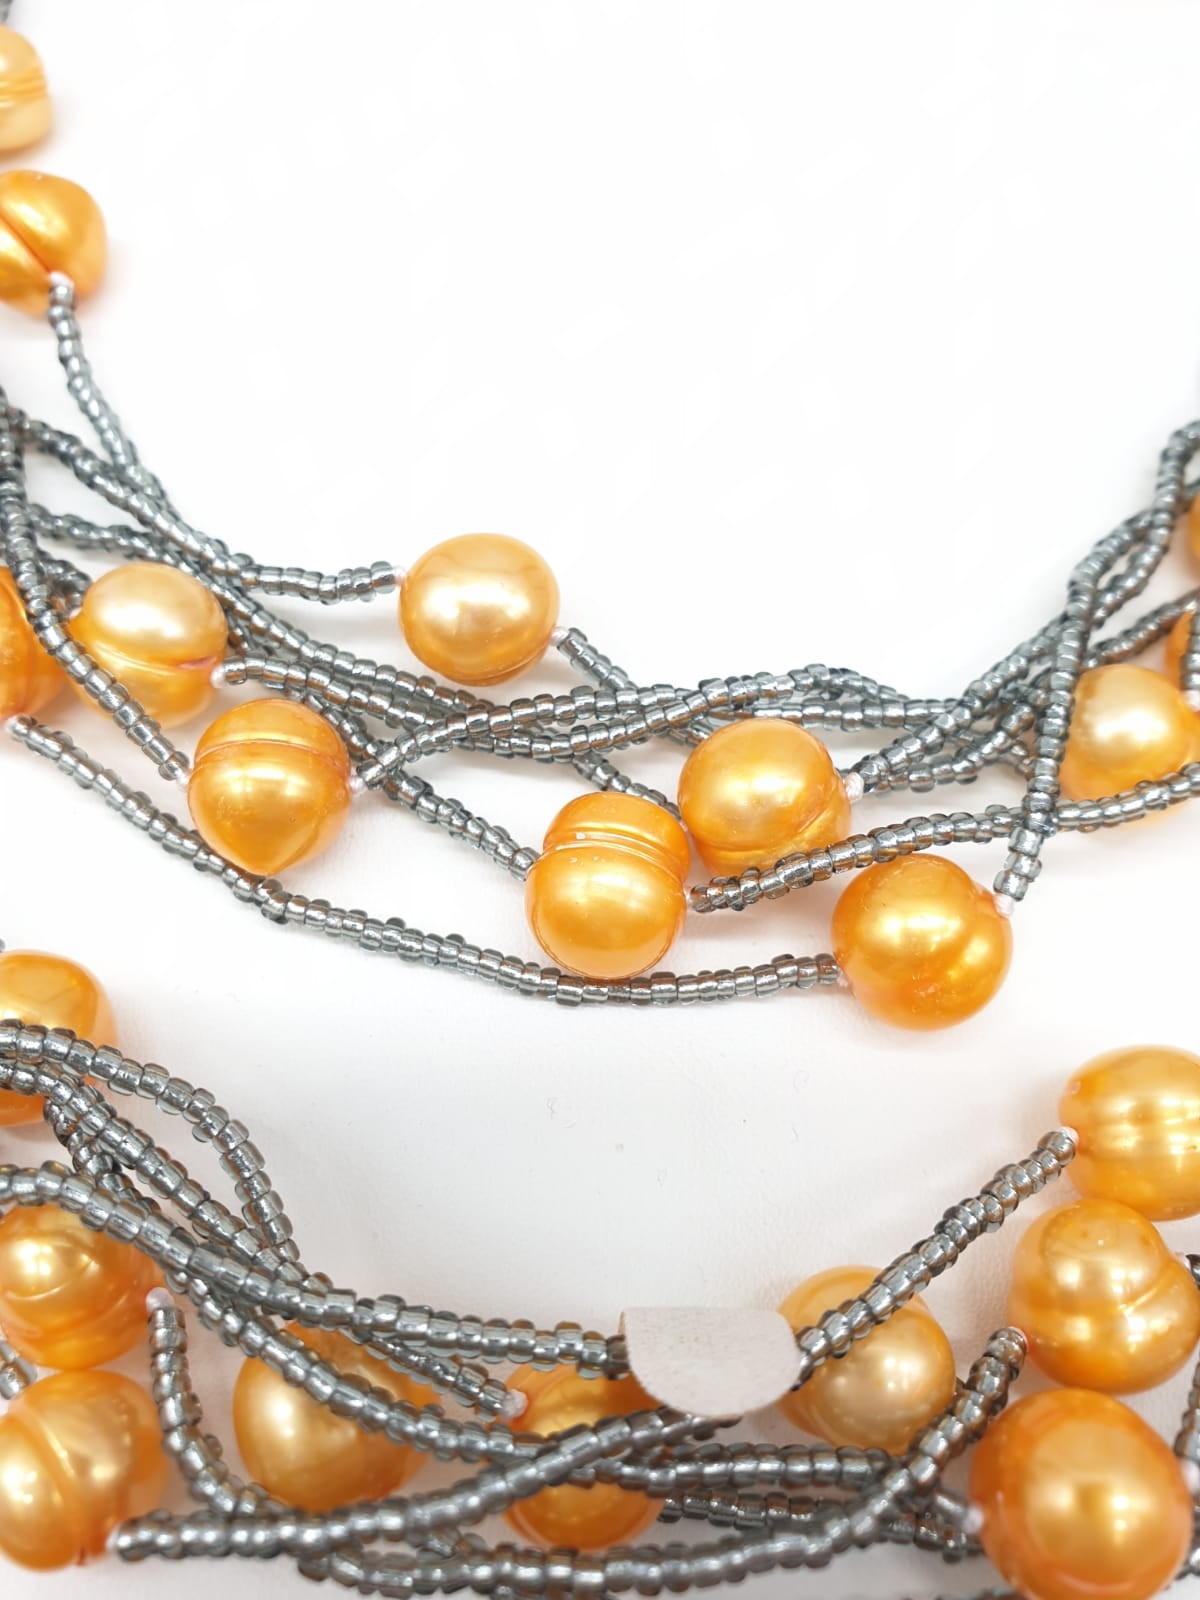 A very unusual necklace and bracelet set with large yellow-orange pearls. In a presentation box. - Image 2 of 3